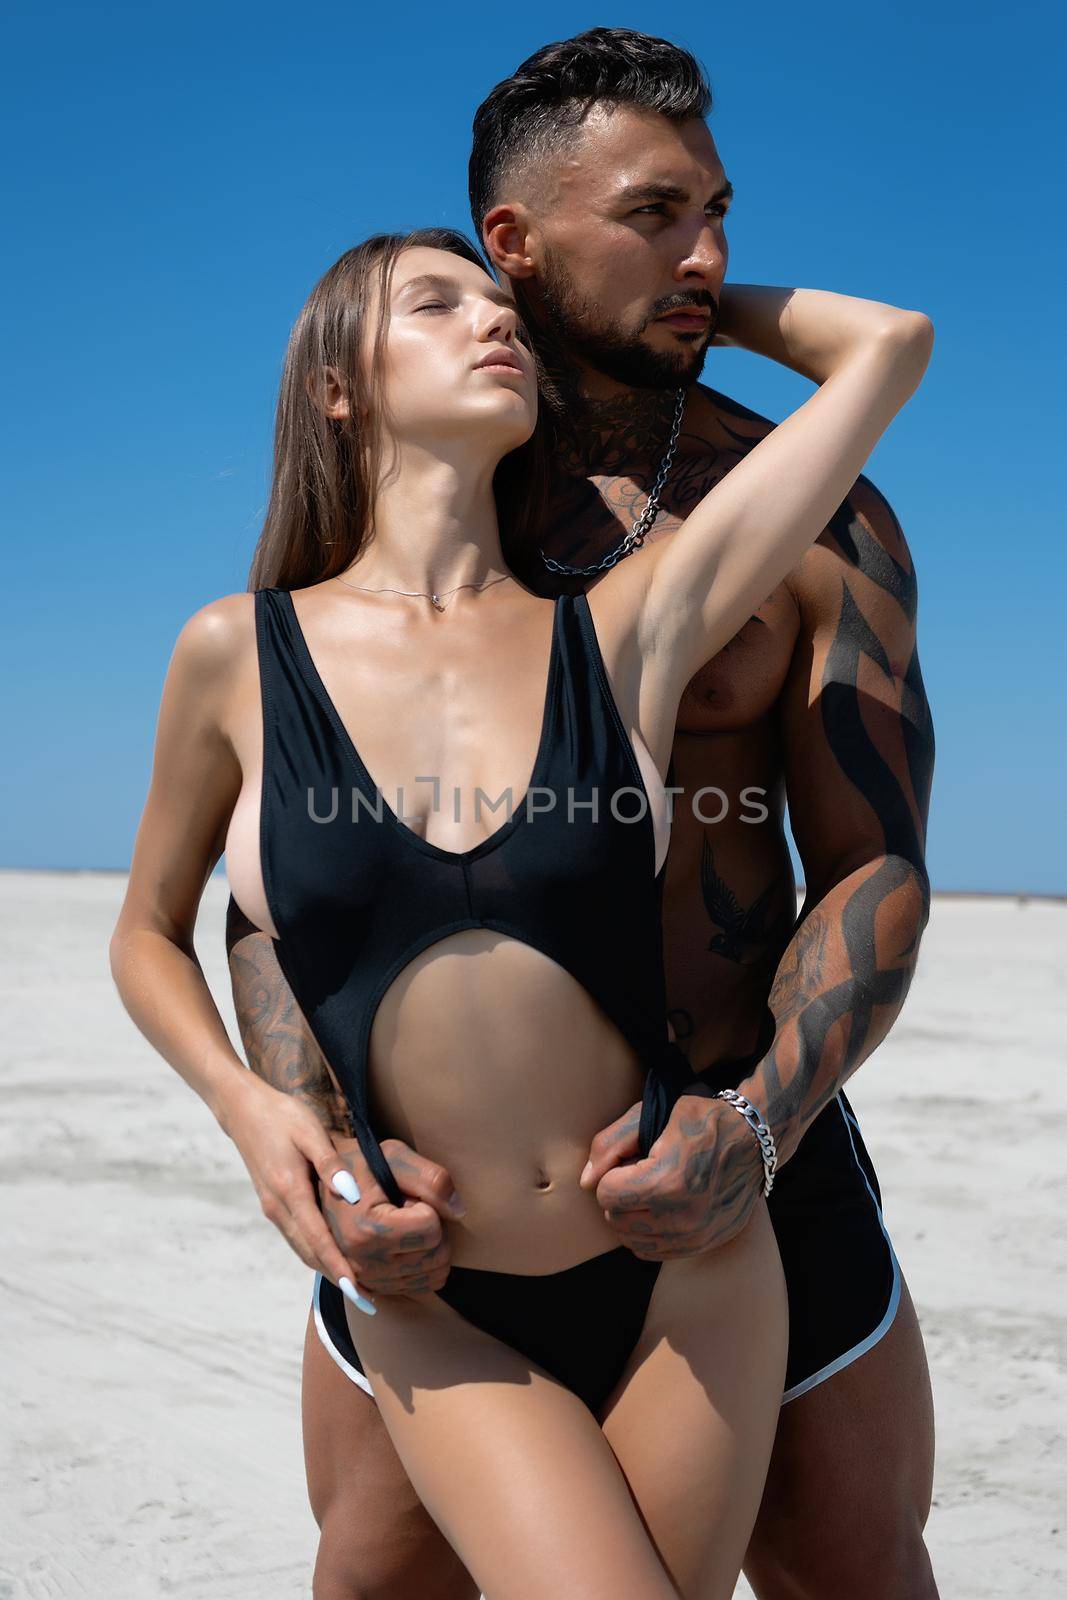 Sexy couple embracing on beach in summer by 3KStudio